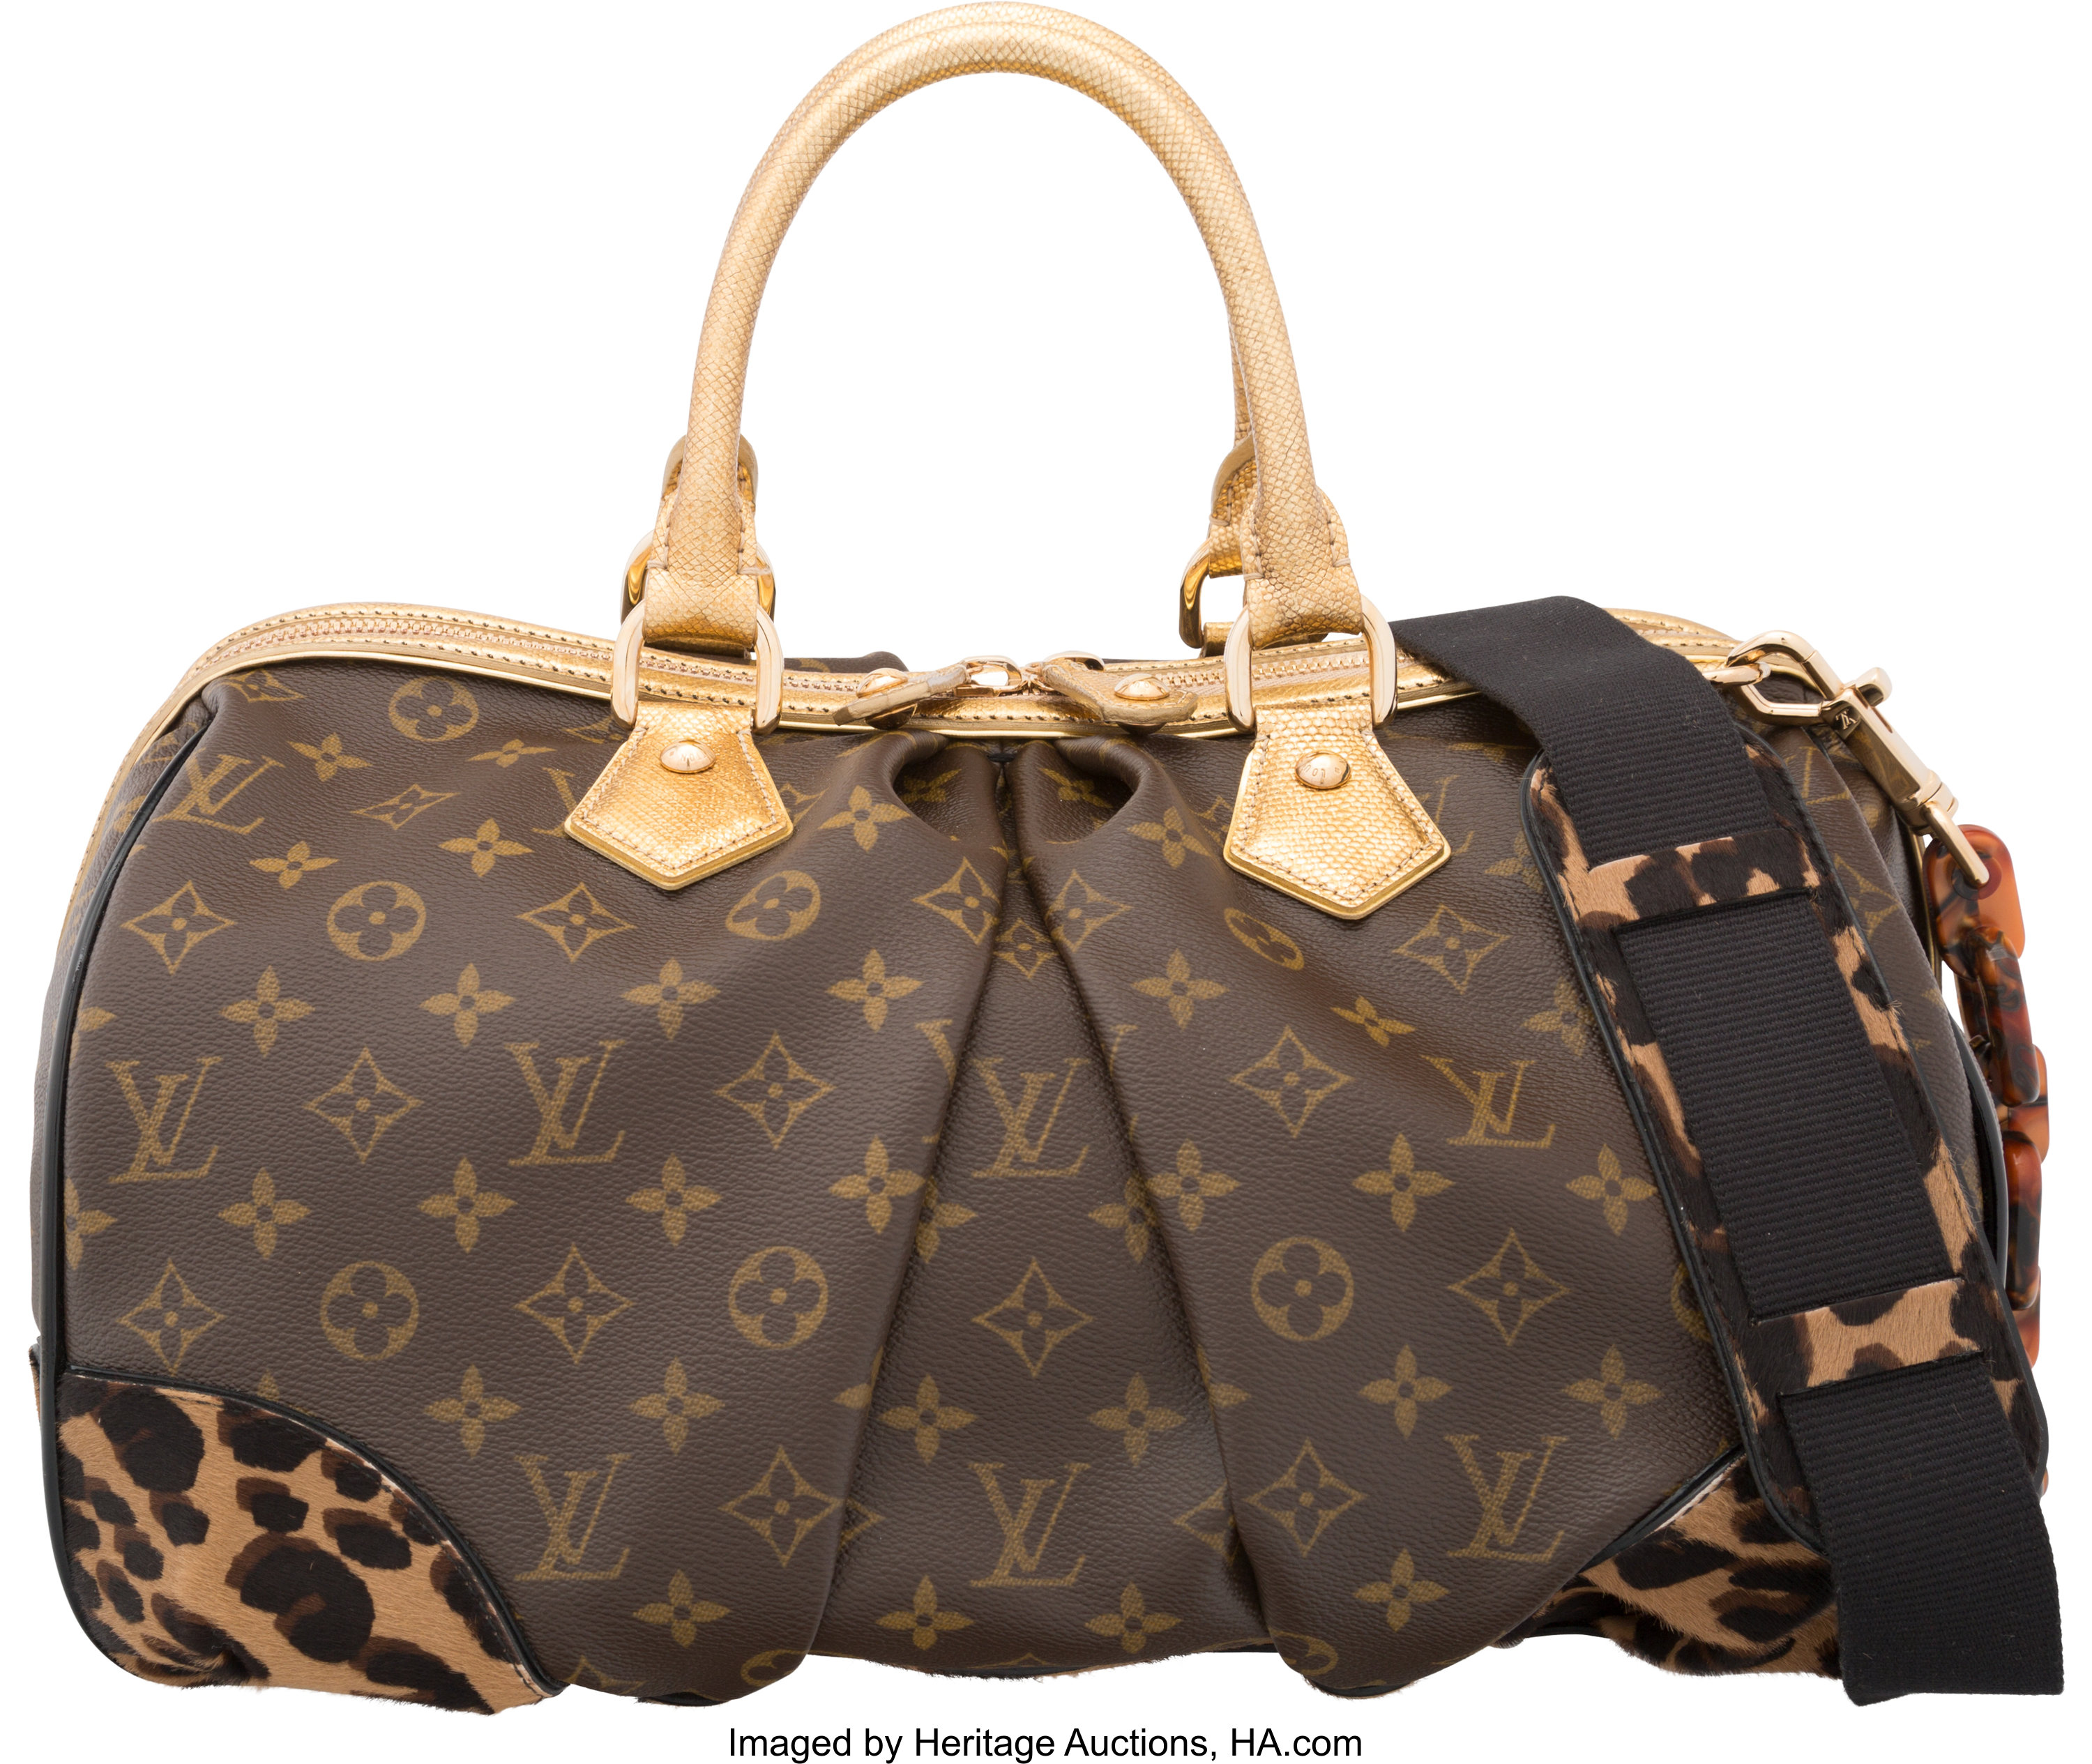 RARE Limited Edition Louis Vuitton Monogram and Leopard Pony Hair